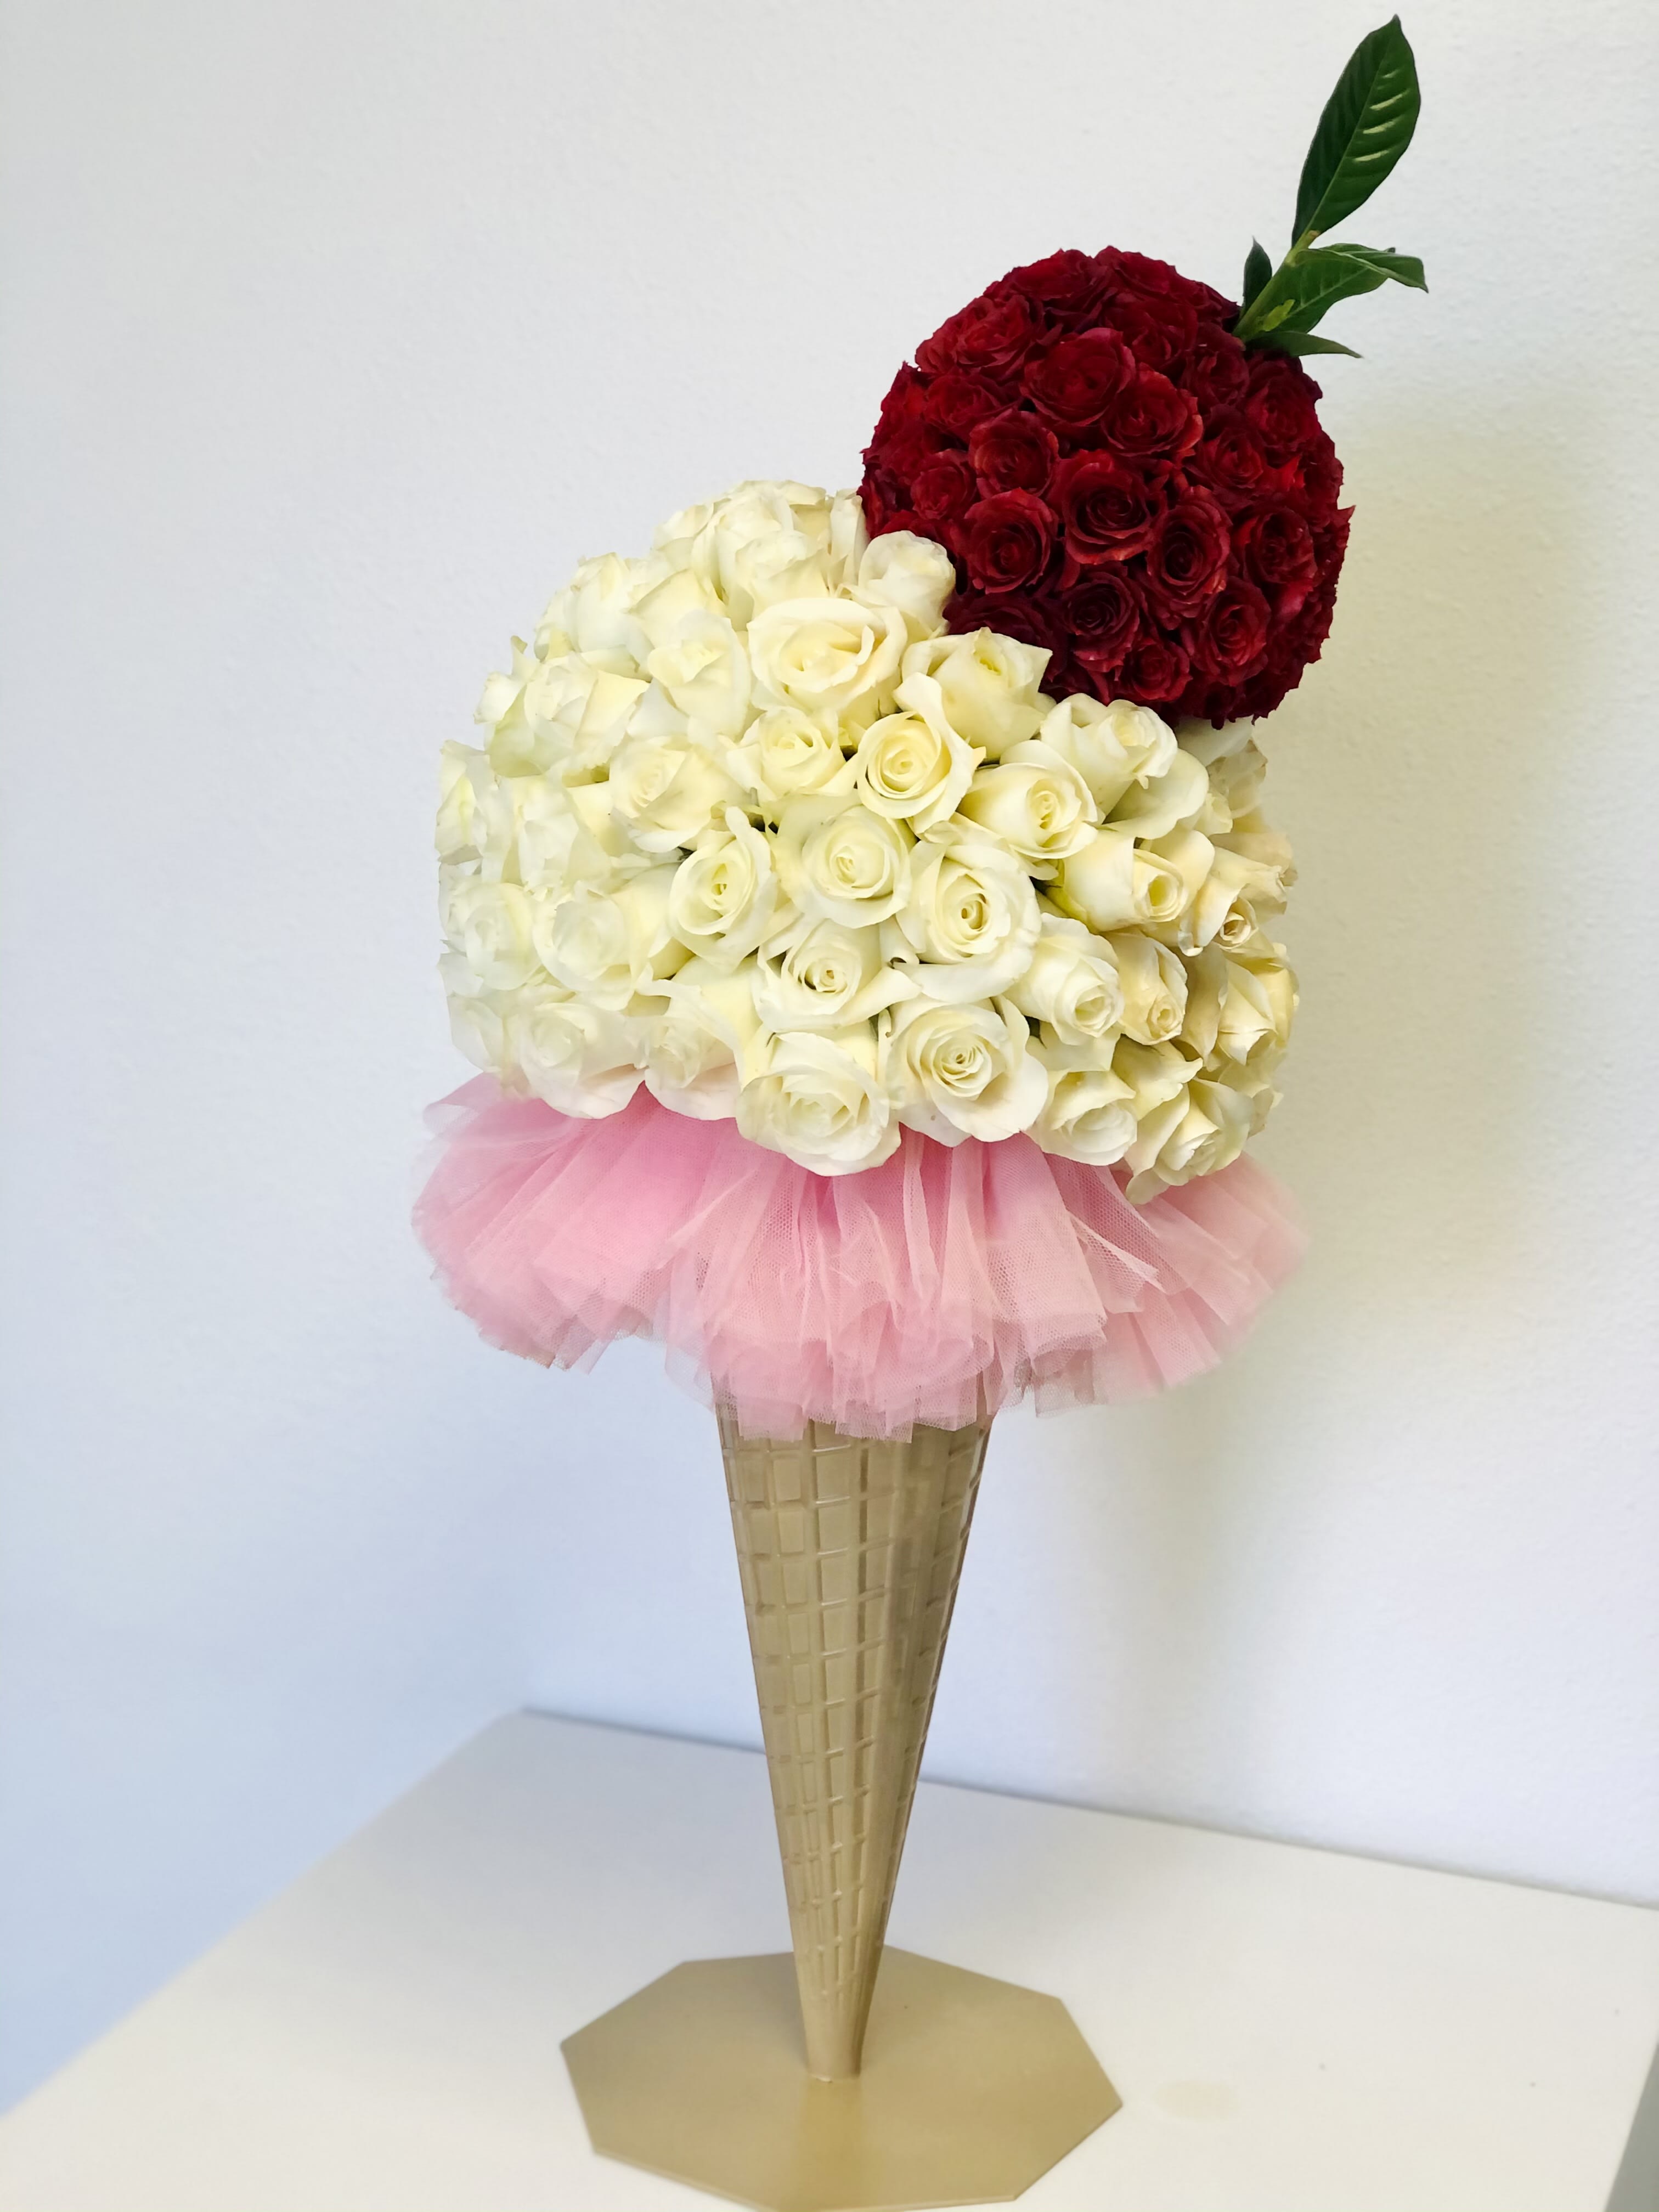 Sweetest Surprise  - An 18” Ice cream cone with a scoop of ice cream made up to 100 roses!  Don’t forget the cherry on top!  Does the recipient have a favorite ice cream flavor?  Message us and we will change the rose color accordingly. 